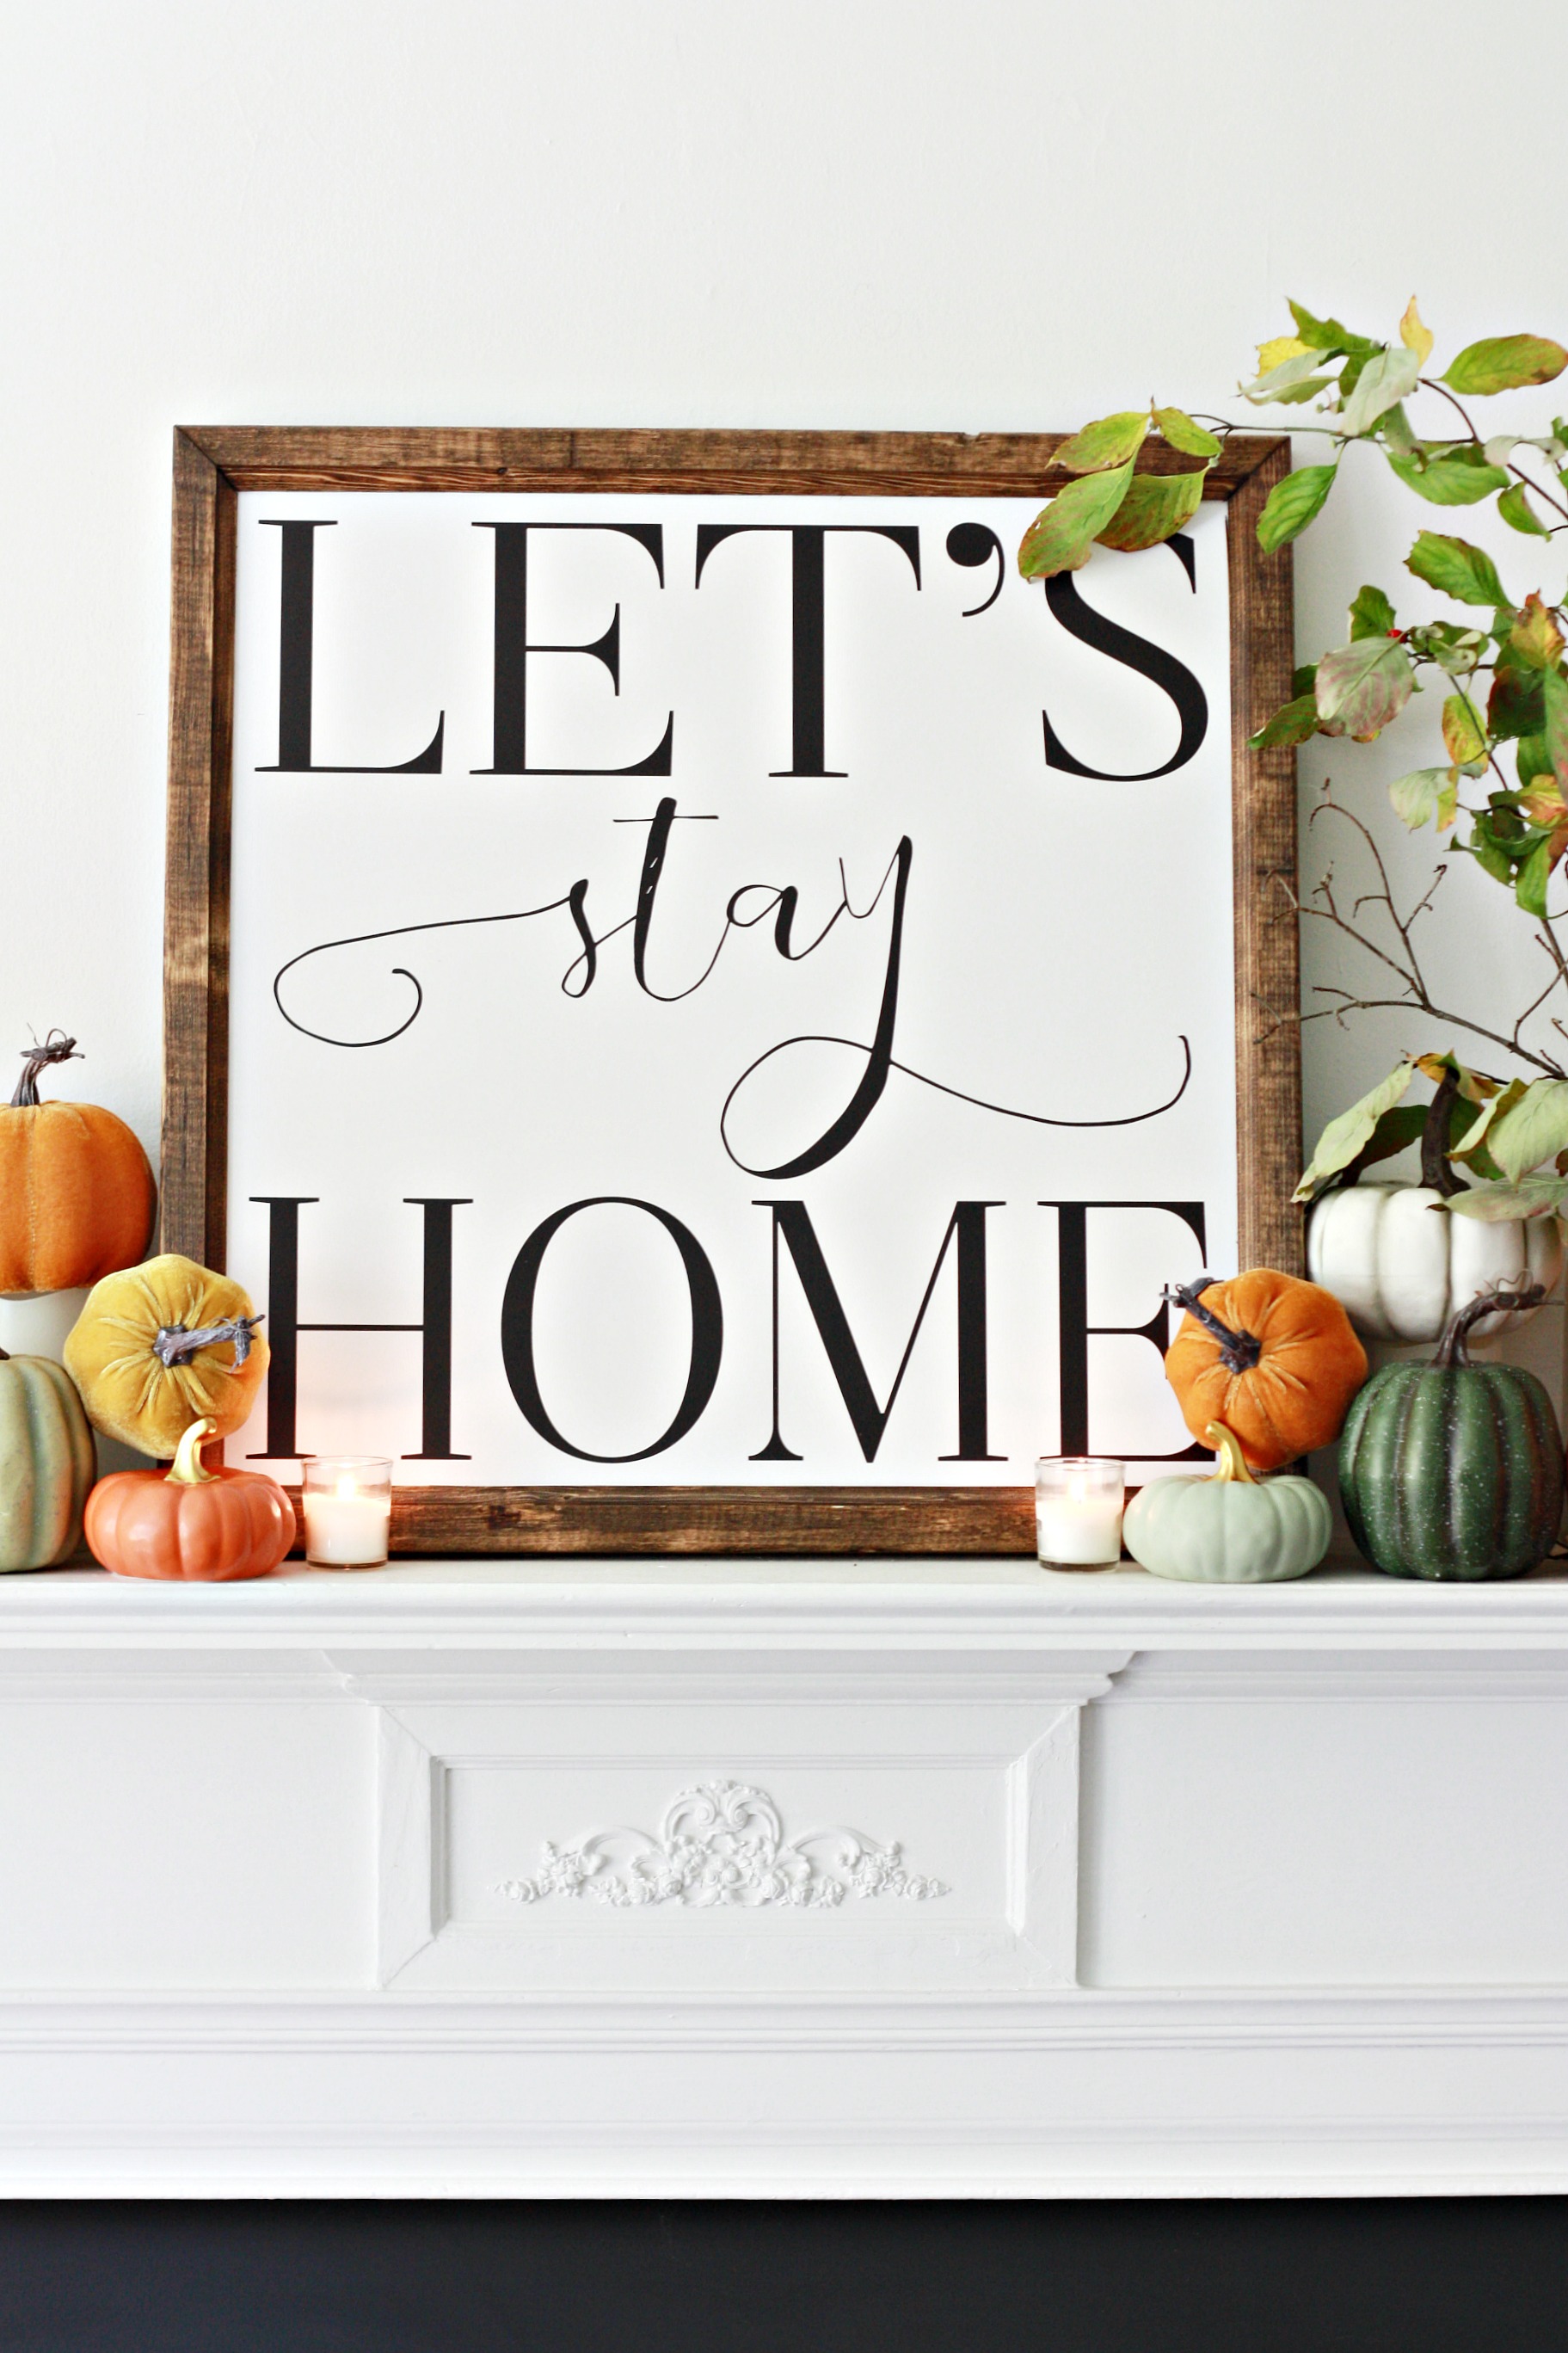 Let's Stay Home Fall Mantel